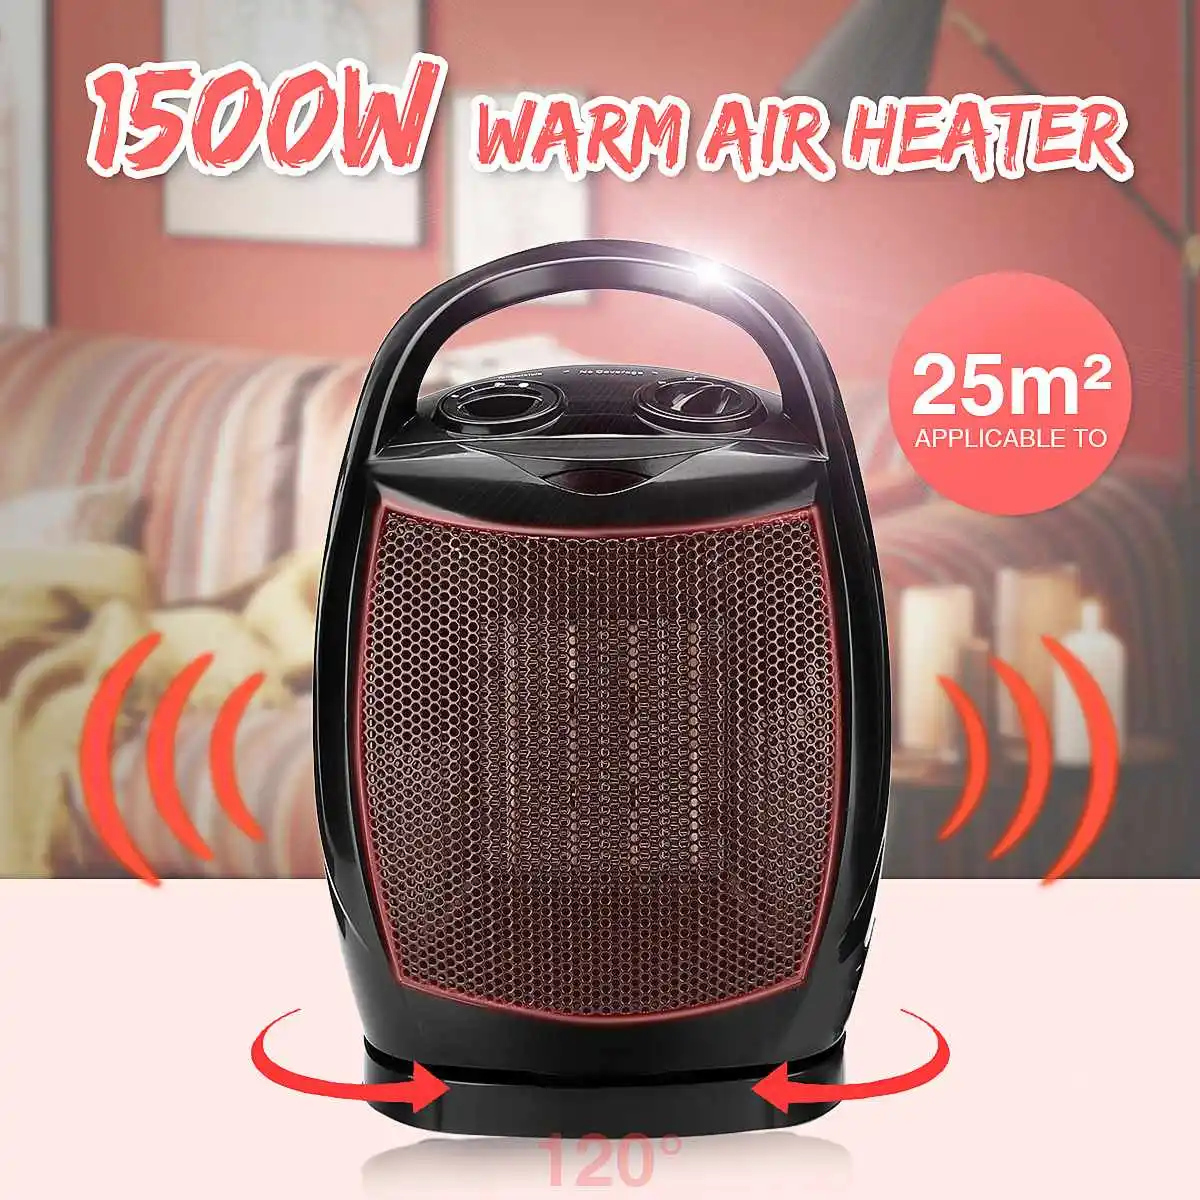 

220V/110V Air Heater Fan 1500W Electric Warm PTC Ceramics Rotation Warmer Thermostat Home Office Adjustable with Handle Safe